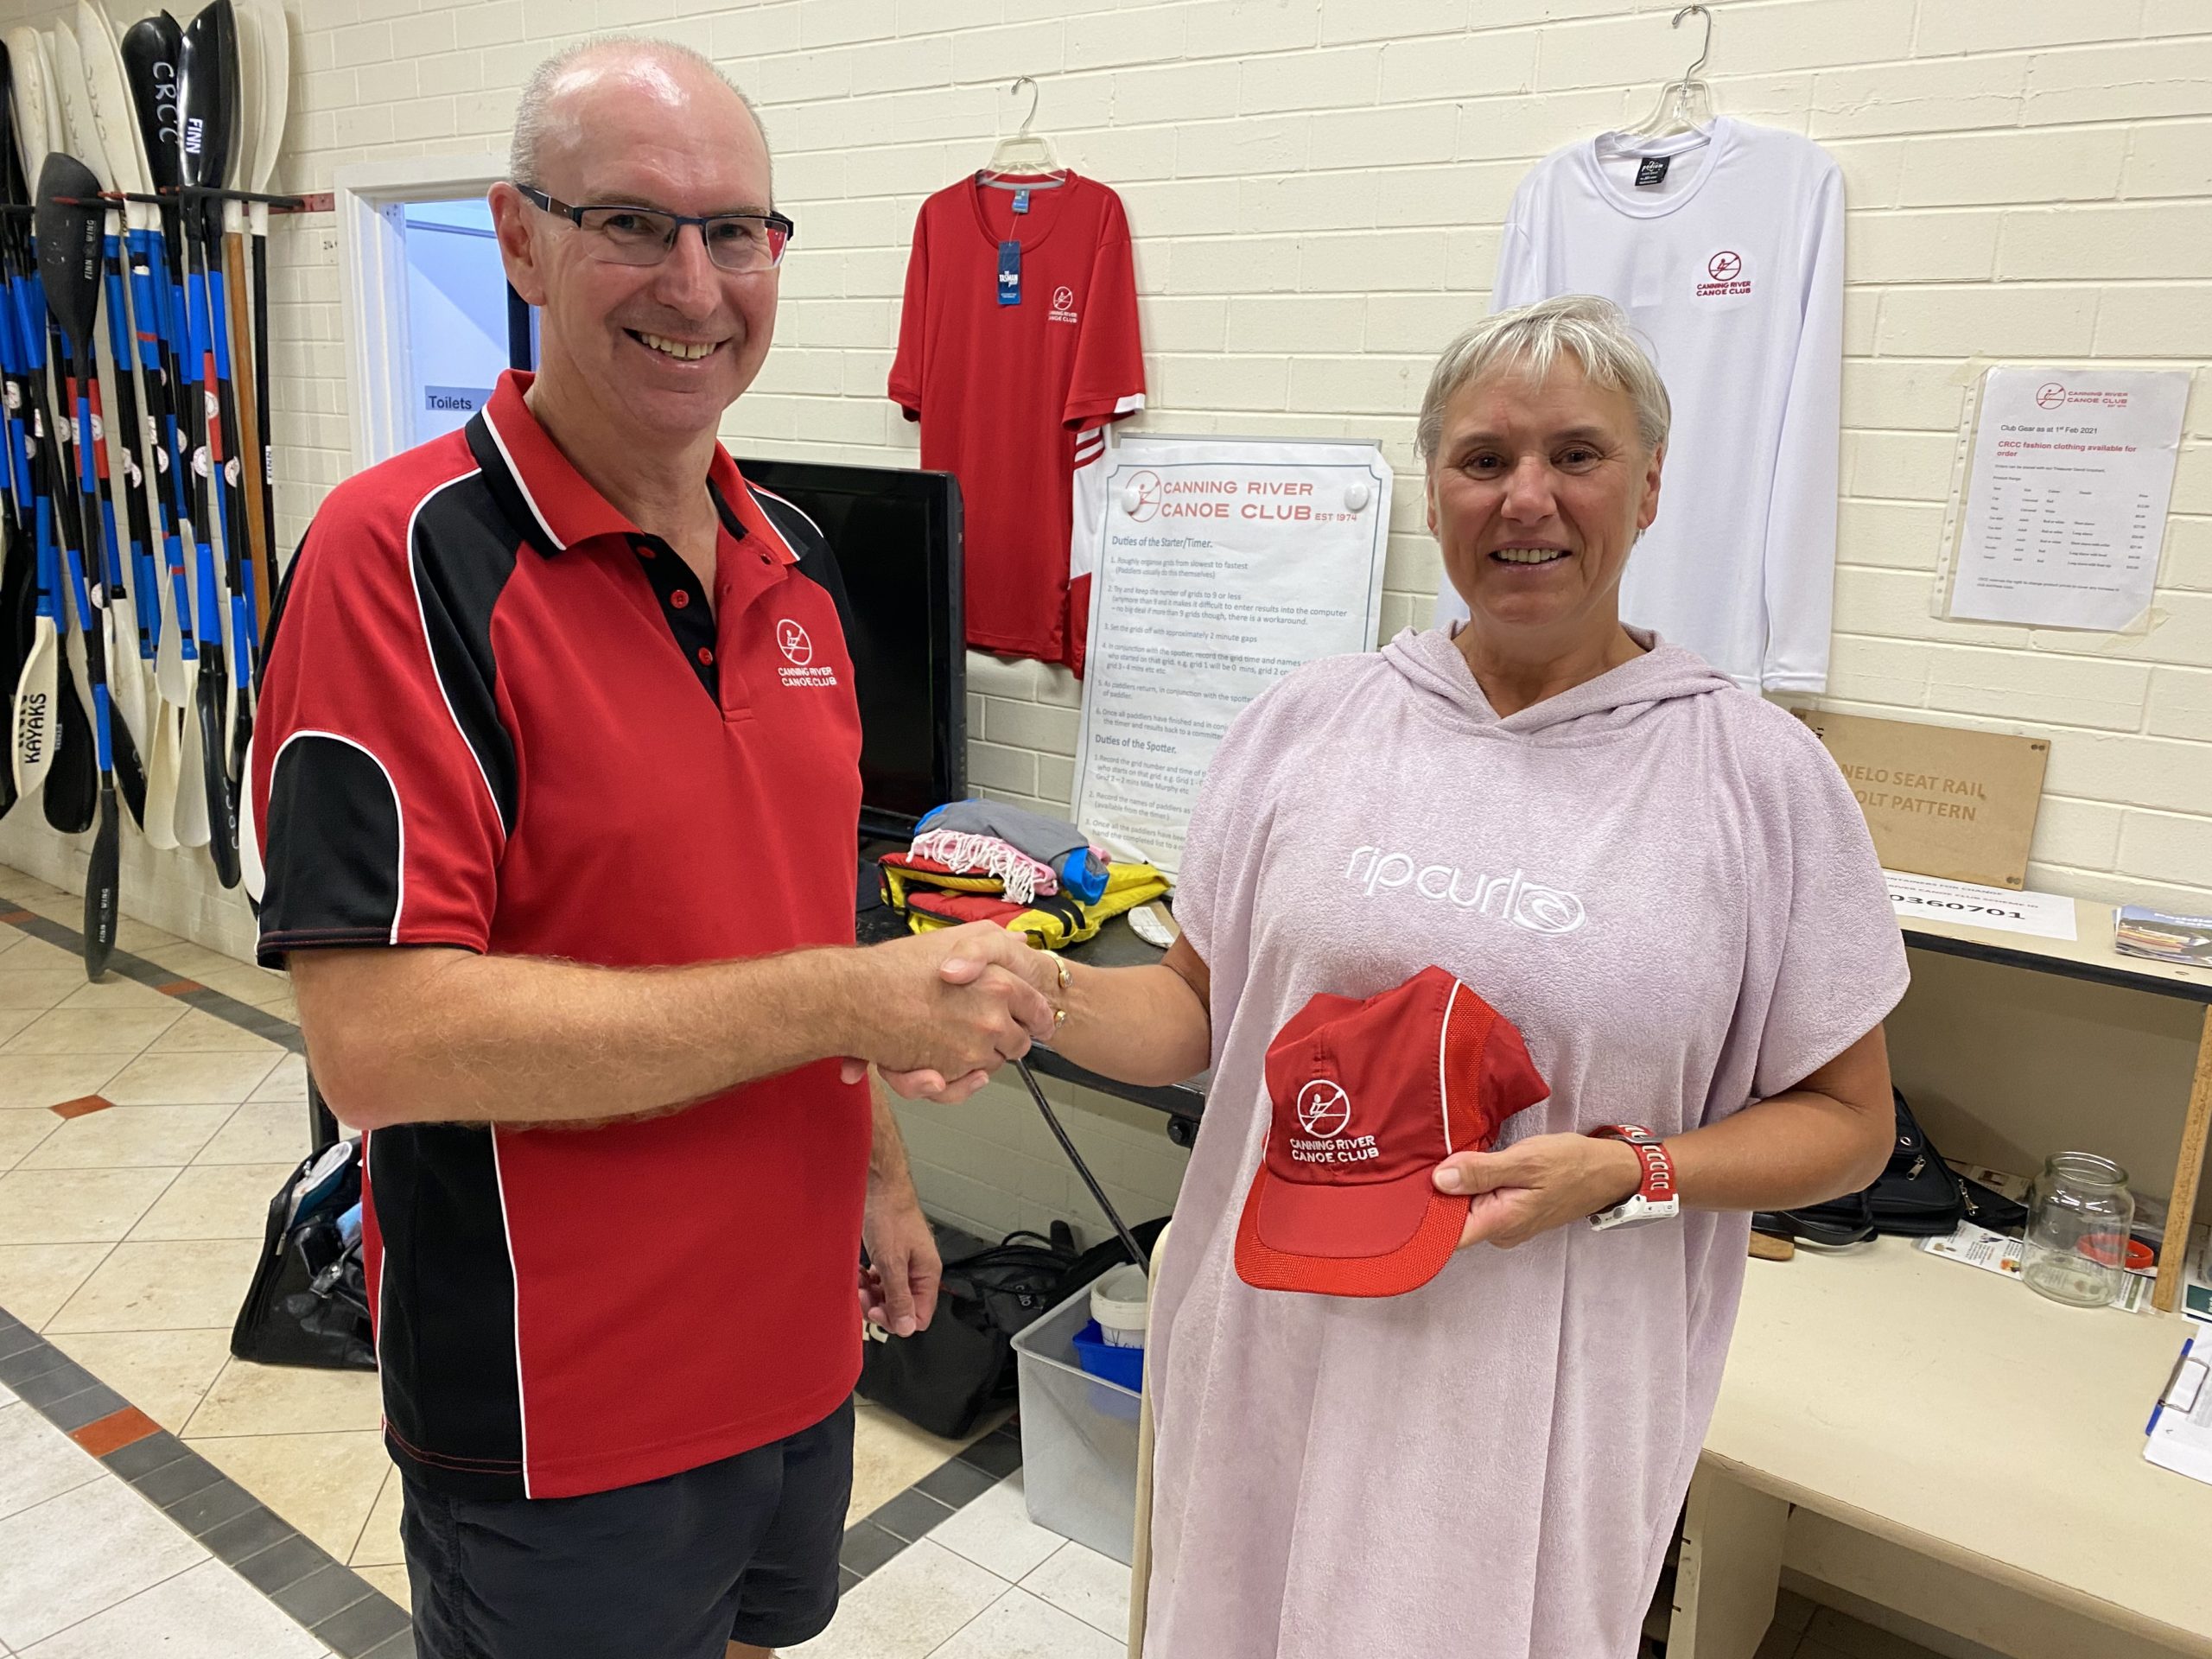 Tuesday 16th March 2021 : Tonight’s photo shows club treasurer David Urquhart presenting tonight’s winner Eve McNicoll with a club cap.